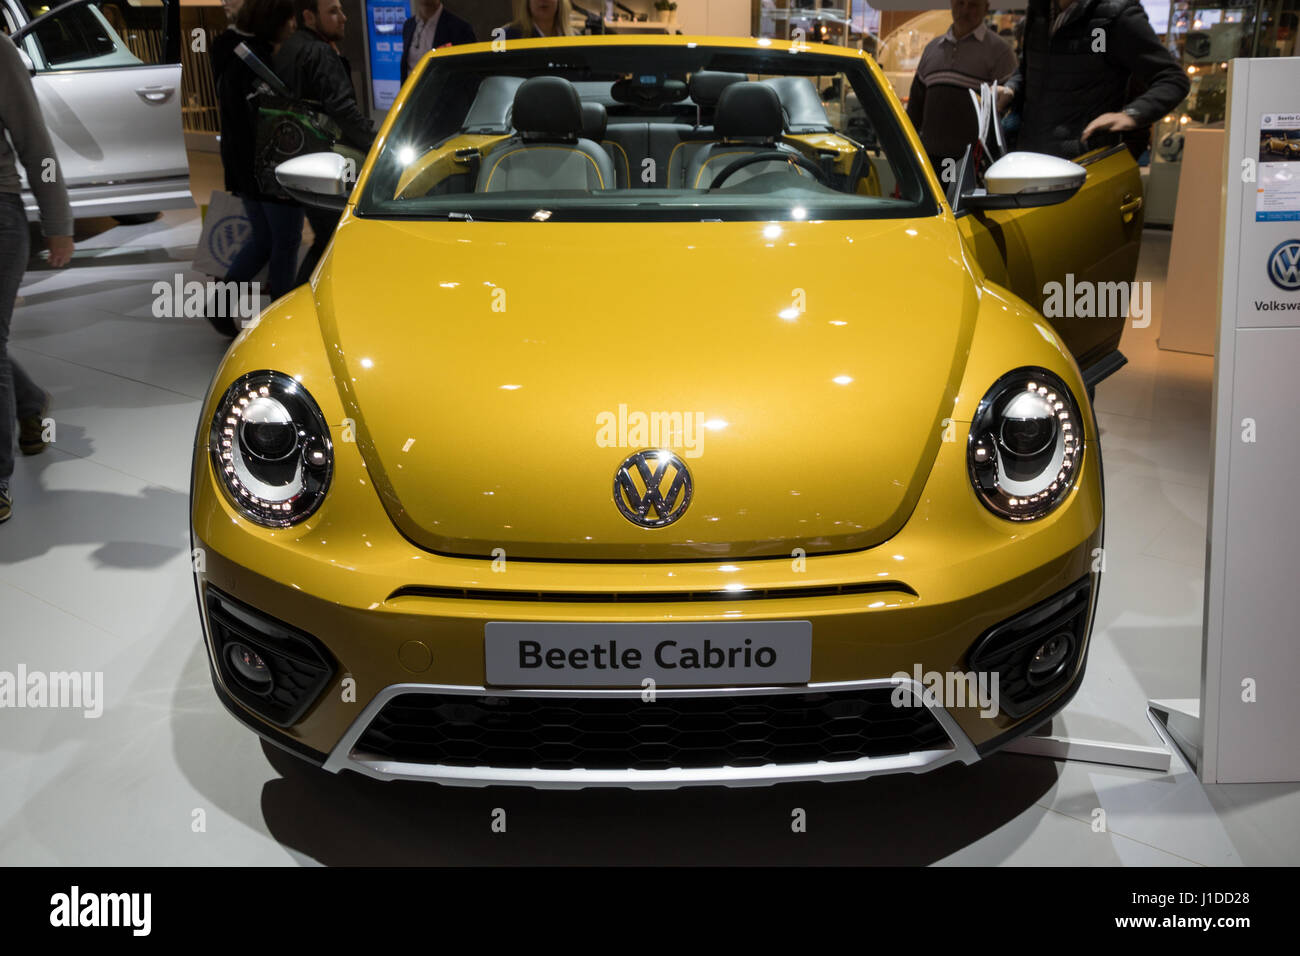 BRUSSELS - JAN 19, 2017: Volkswagen Beetle Cabrio car at the Brussels Auto Salon. Stock Photo